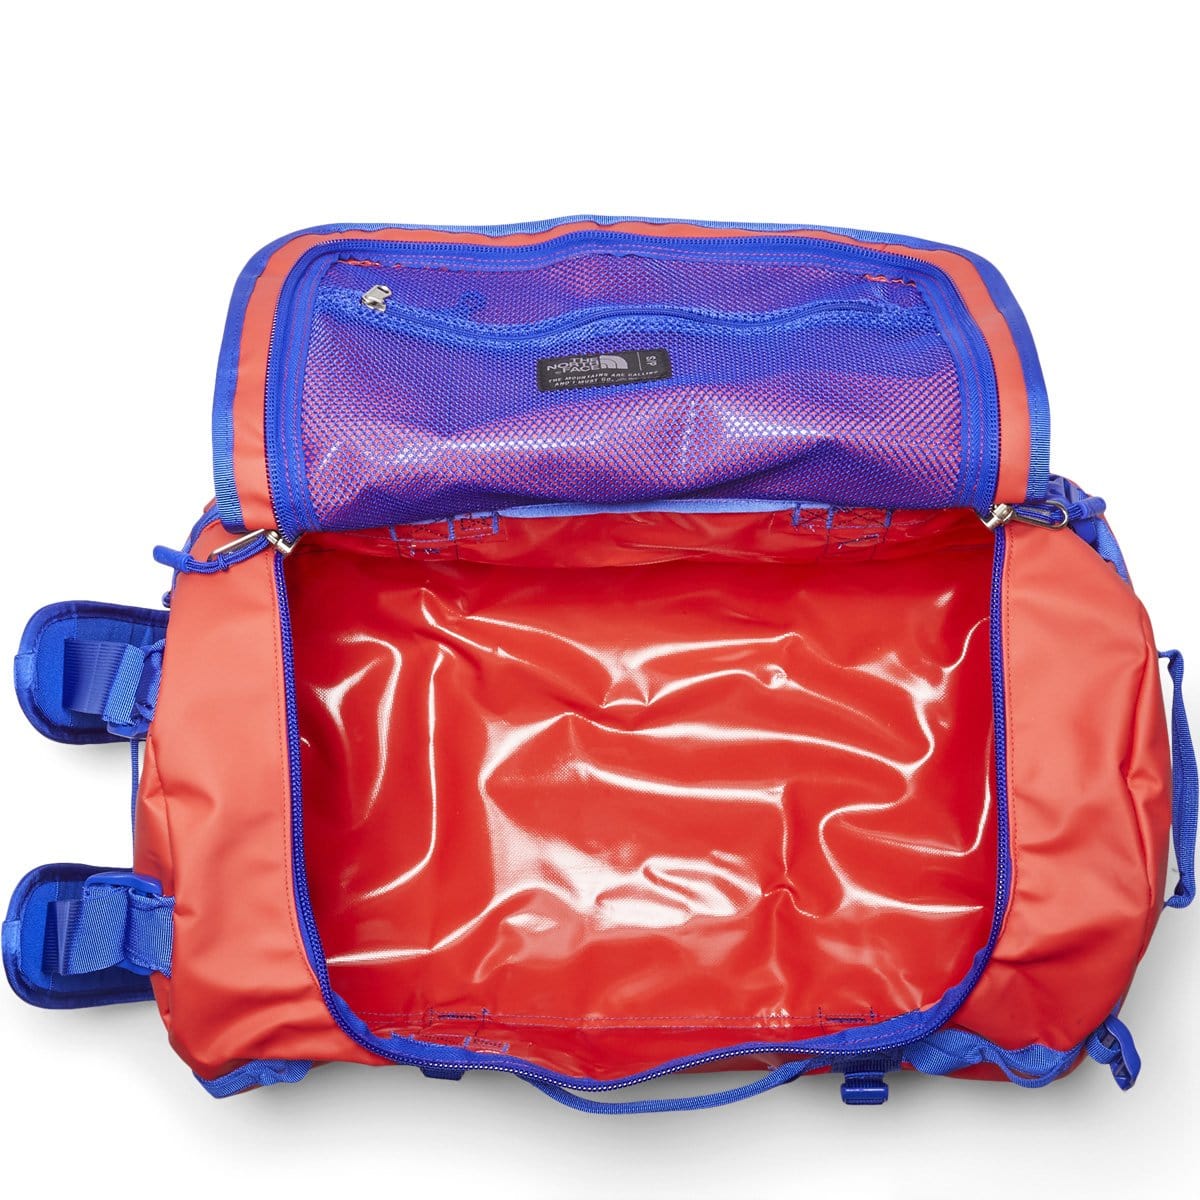 The North Face Bags & Accessories HORIZON RED/TNF BLUE / O/S BASE CAMP DUFFEL